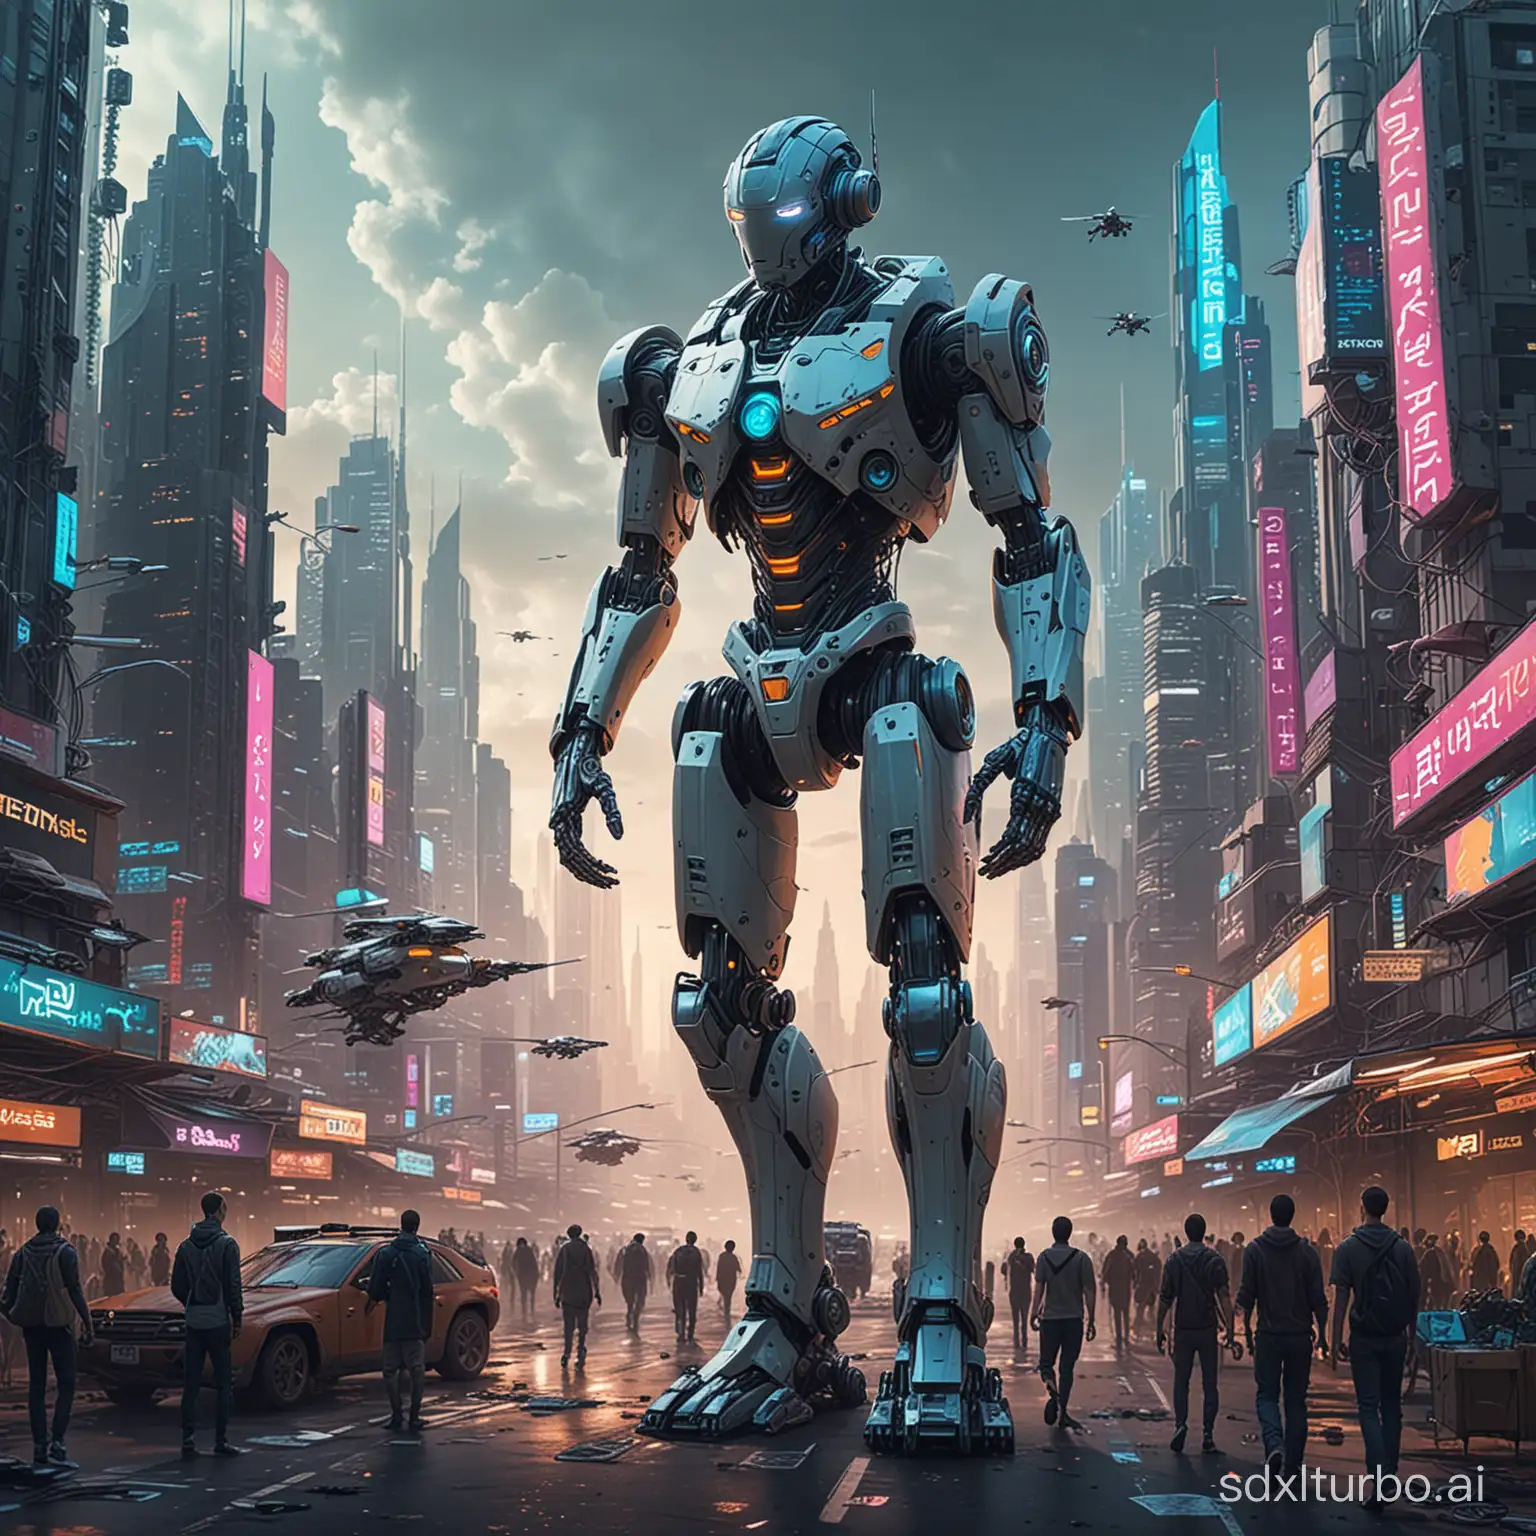 Futuristic-Cyberpunk-City-Coexistence-of-Humans-and-Robots